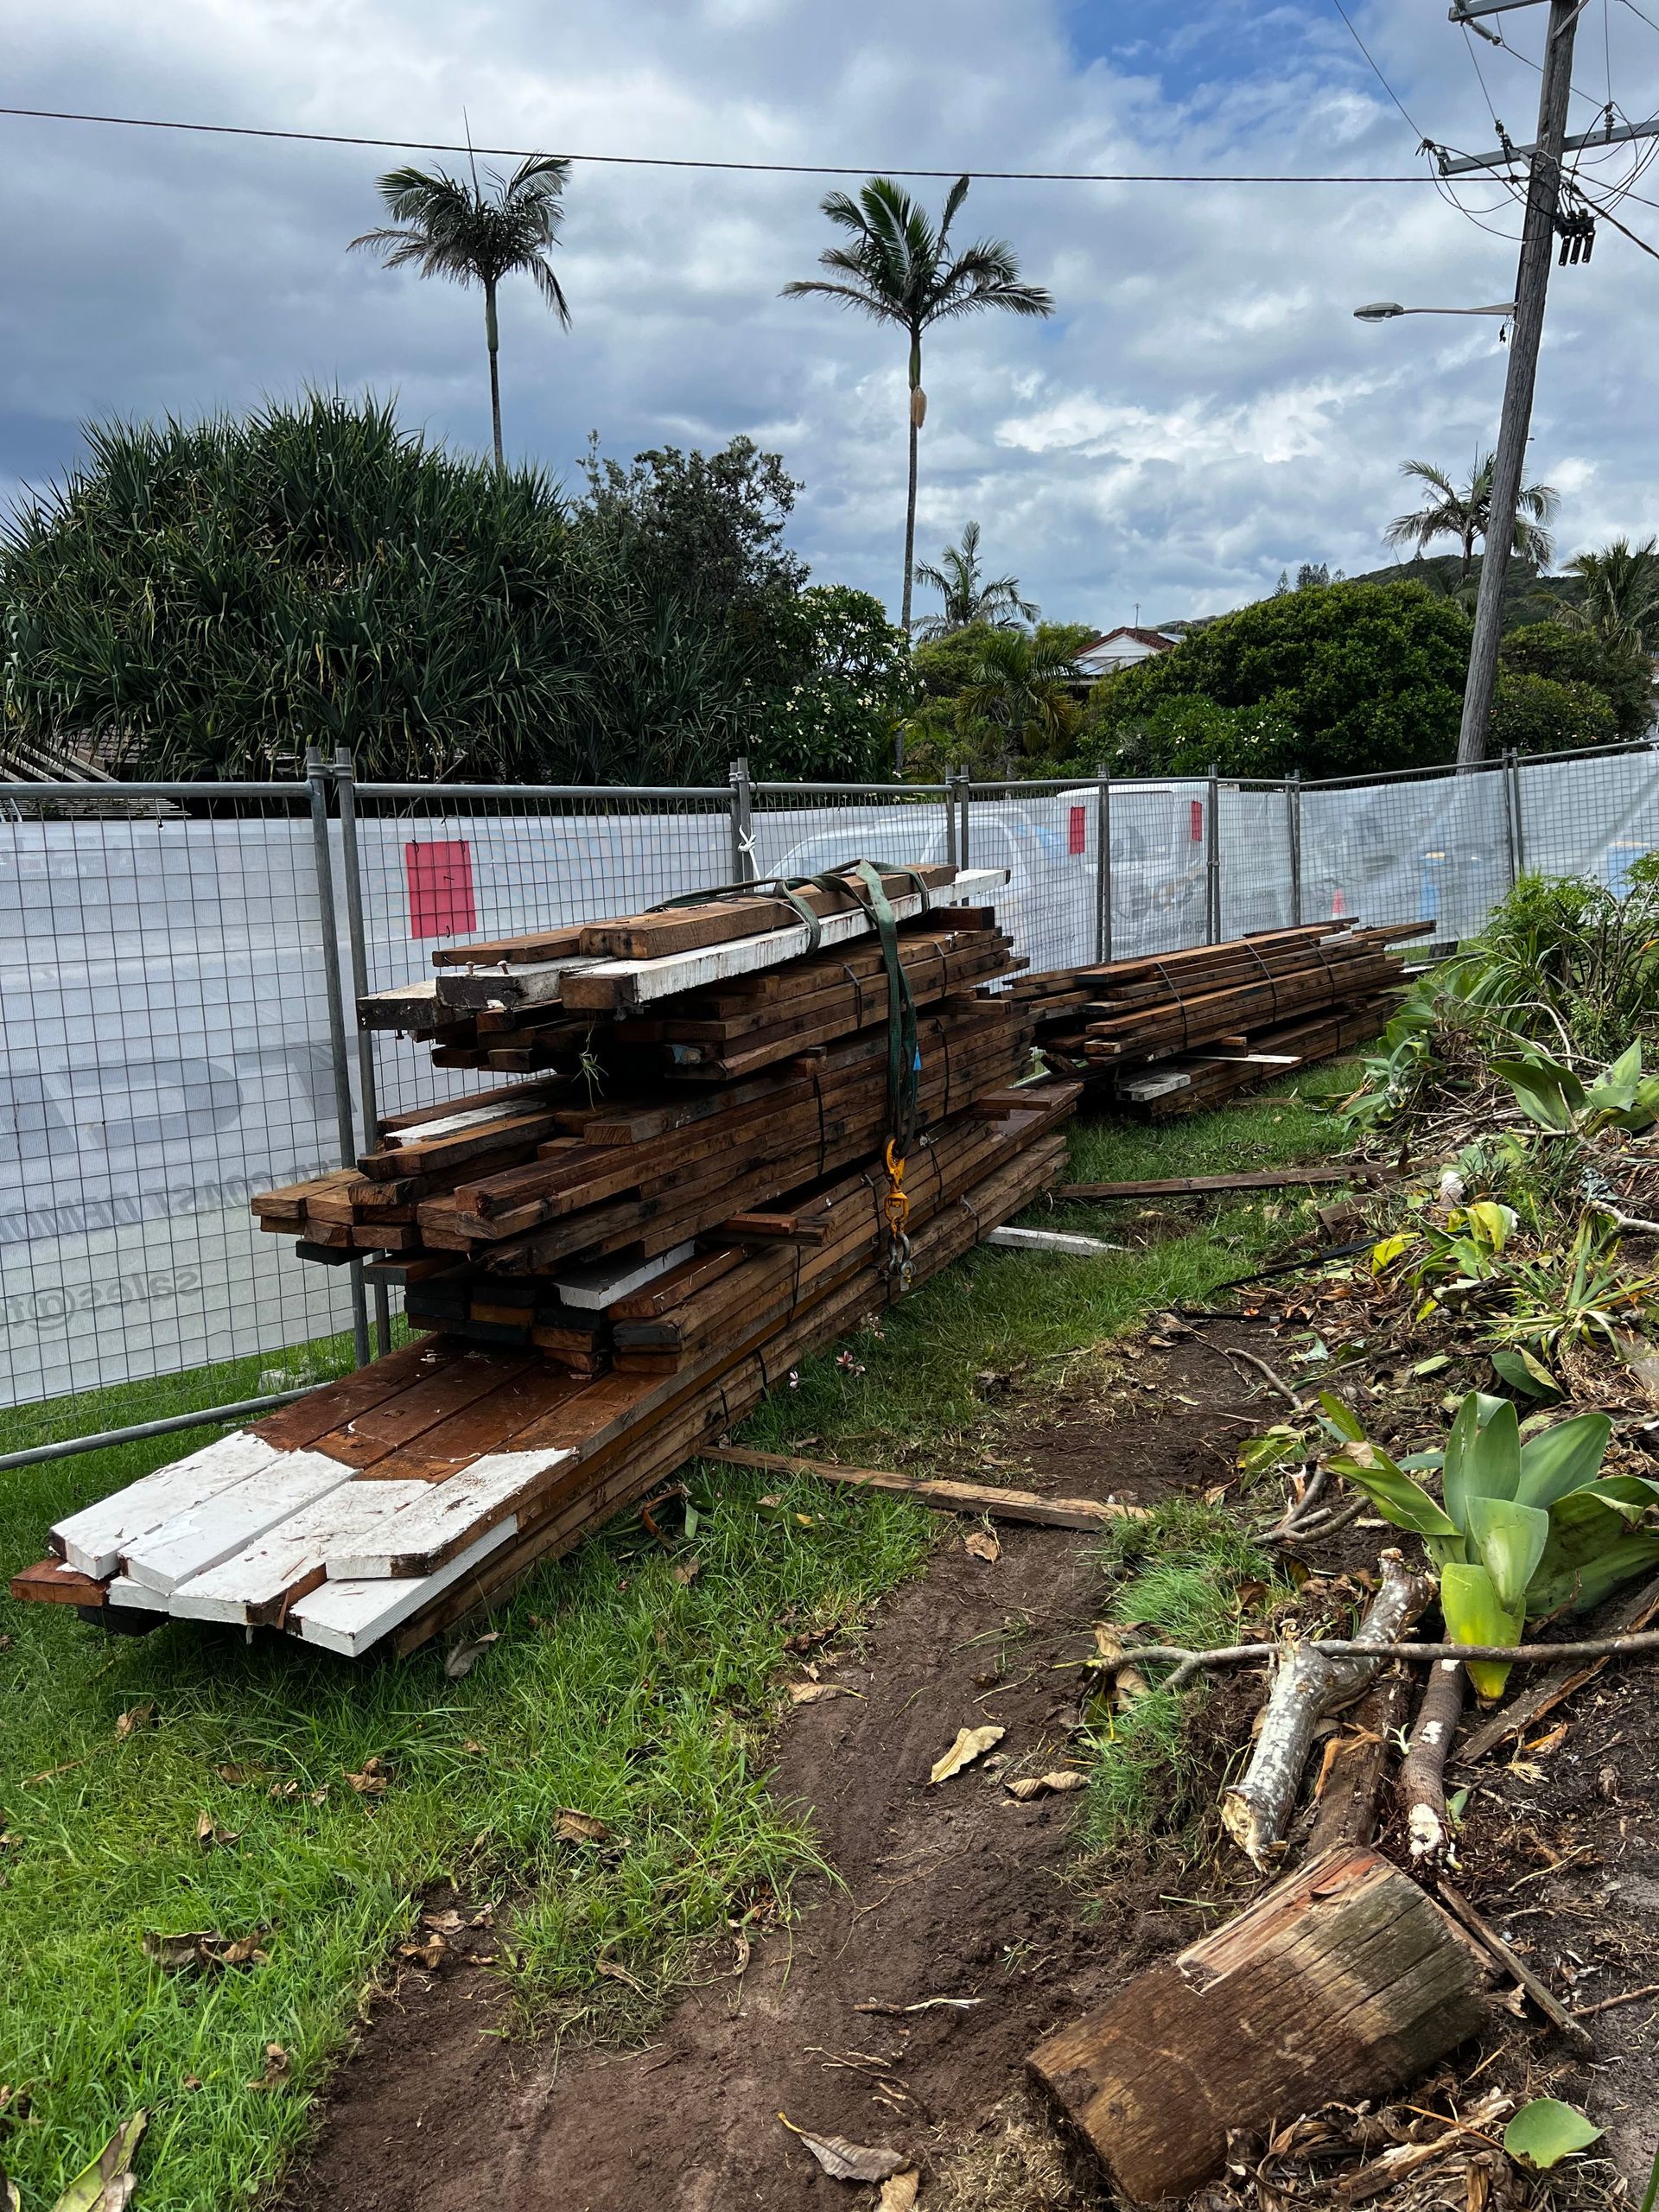 Asbestos Removal In Progress — Asbestos Removal And Demolition in Byron Bay, NSW